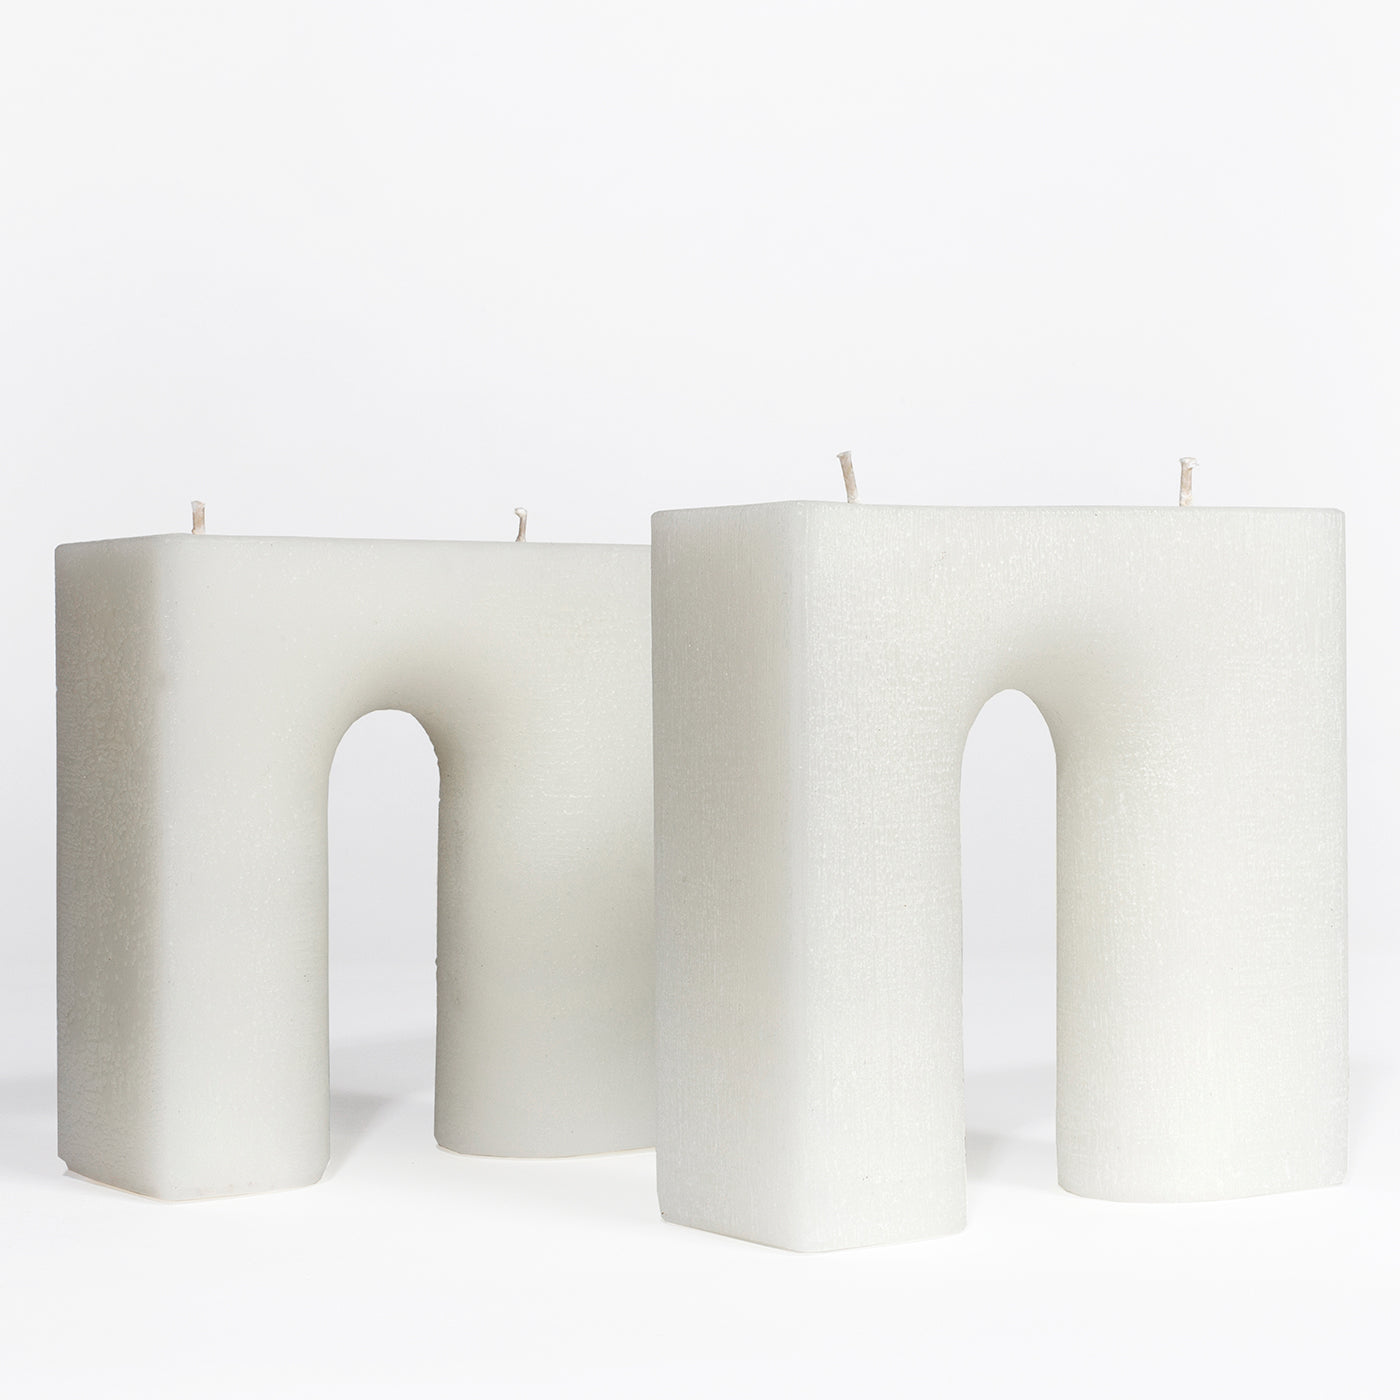 Trionfo Set of 2 White Candles - Alternative view 2